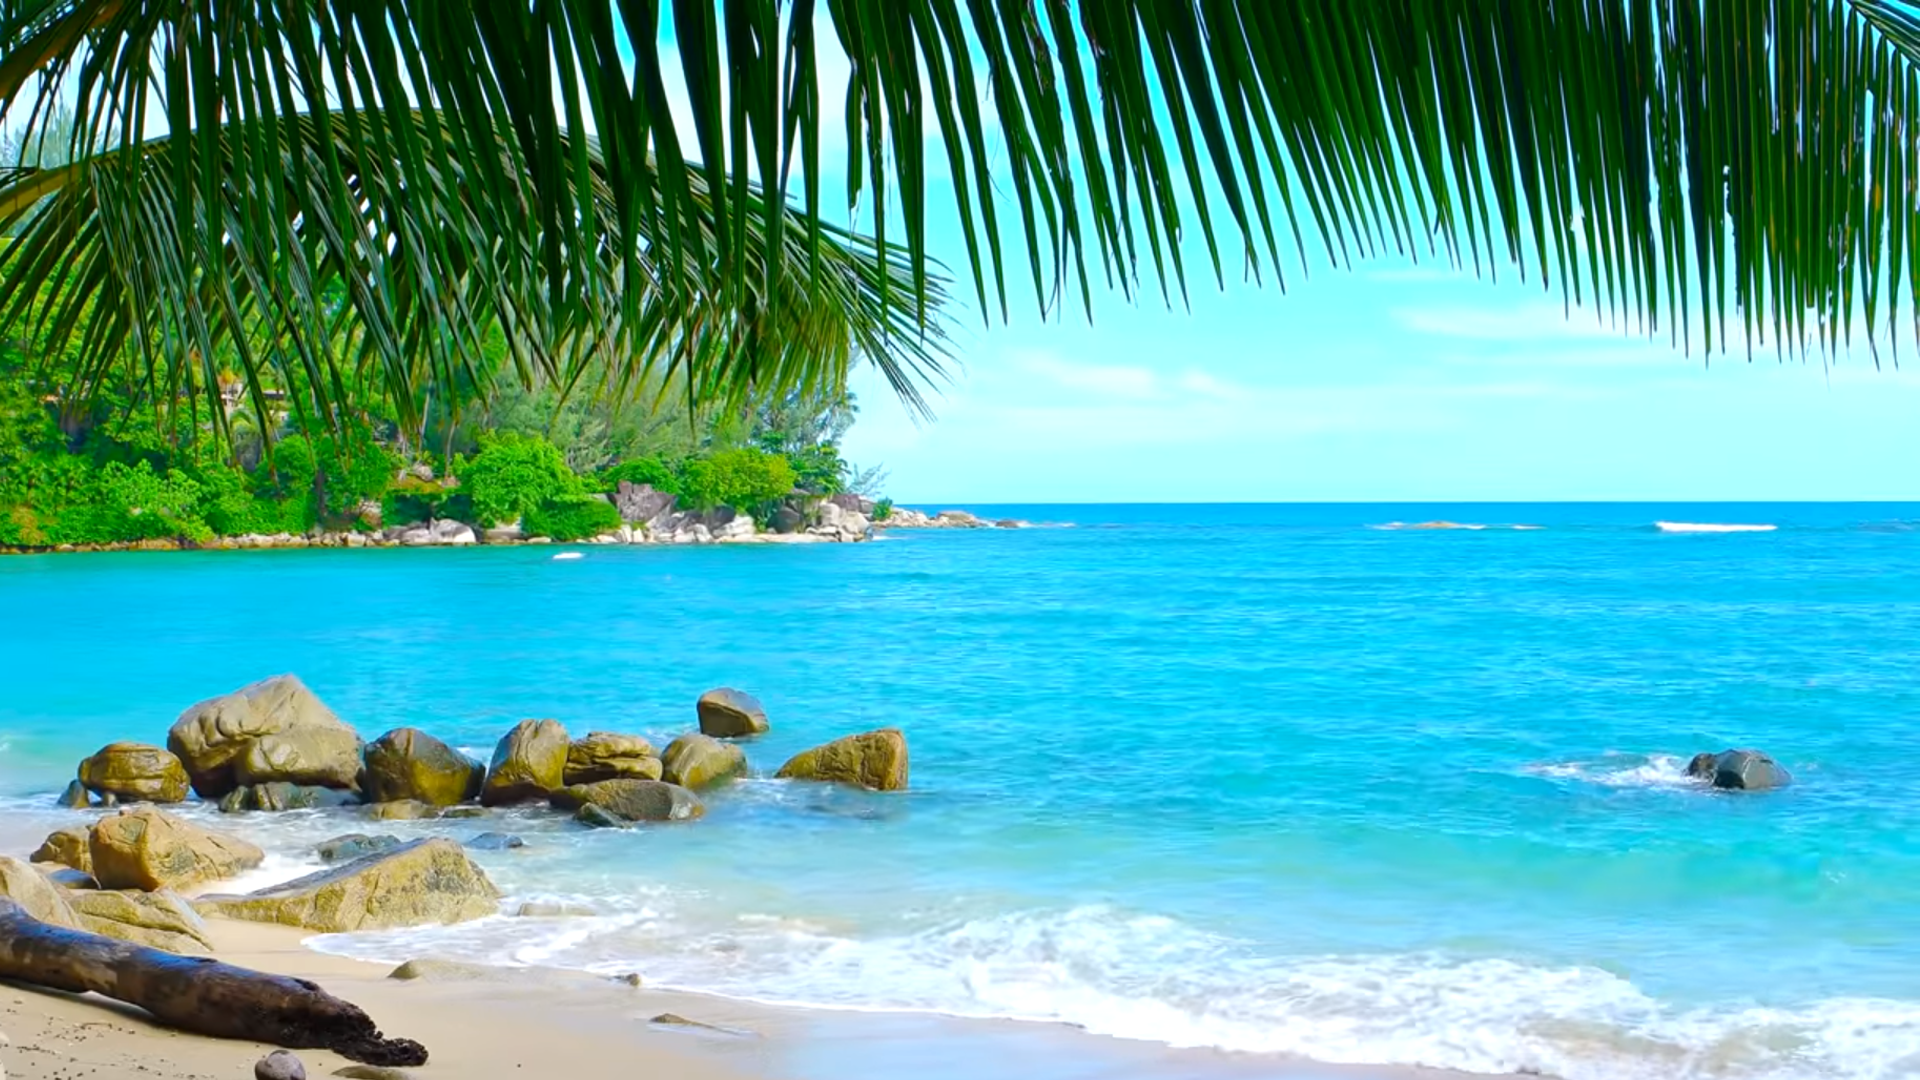 10 Best Tropical Beaches You Must Visit in Your Lifetime - Add to